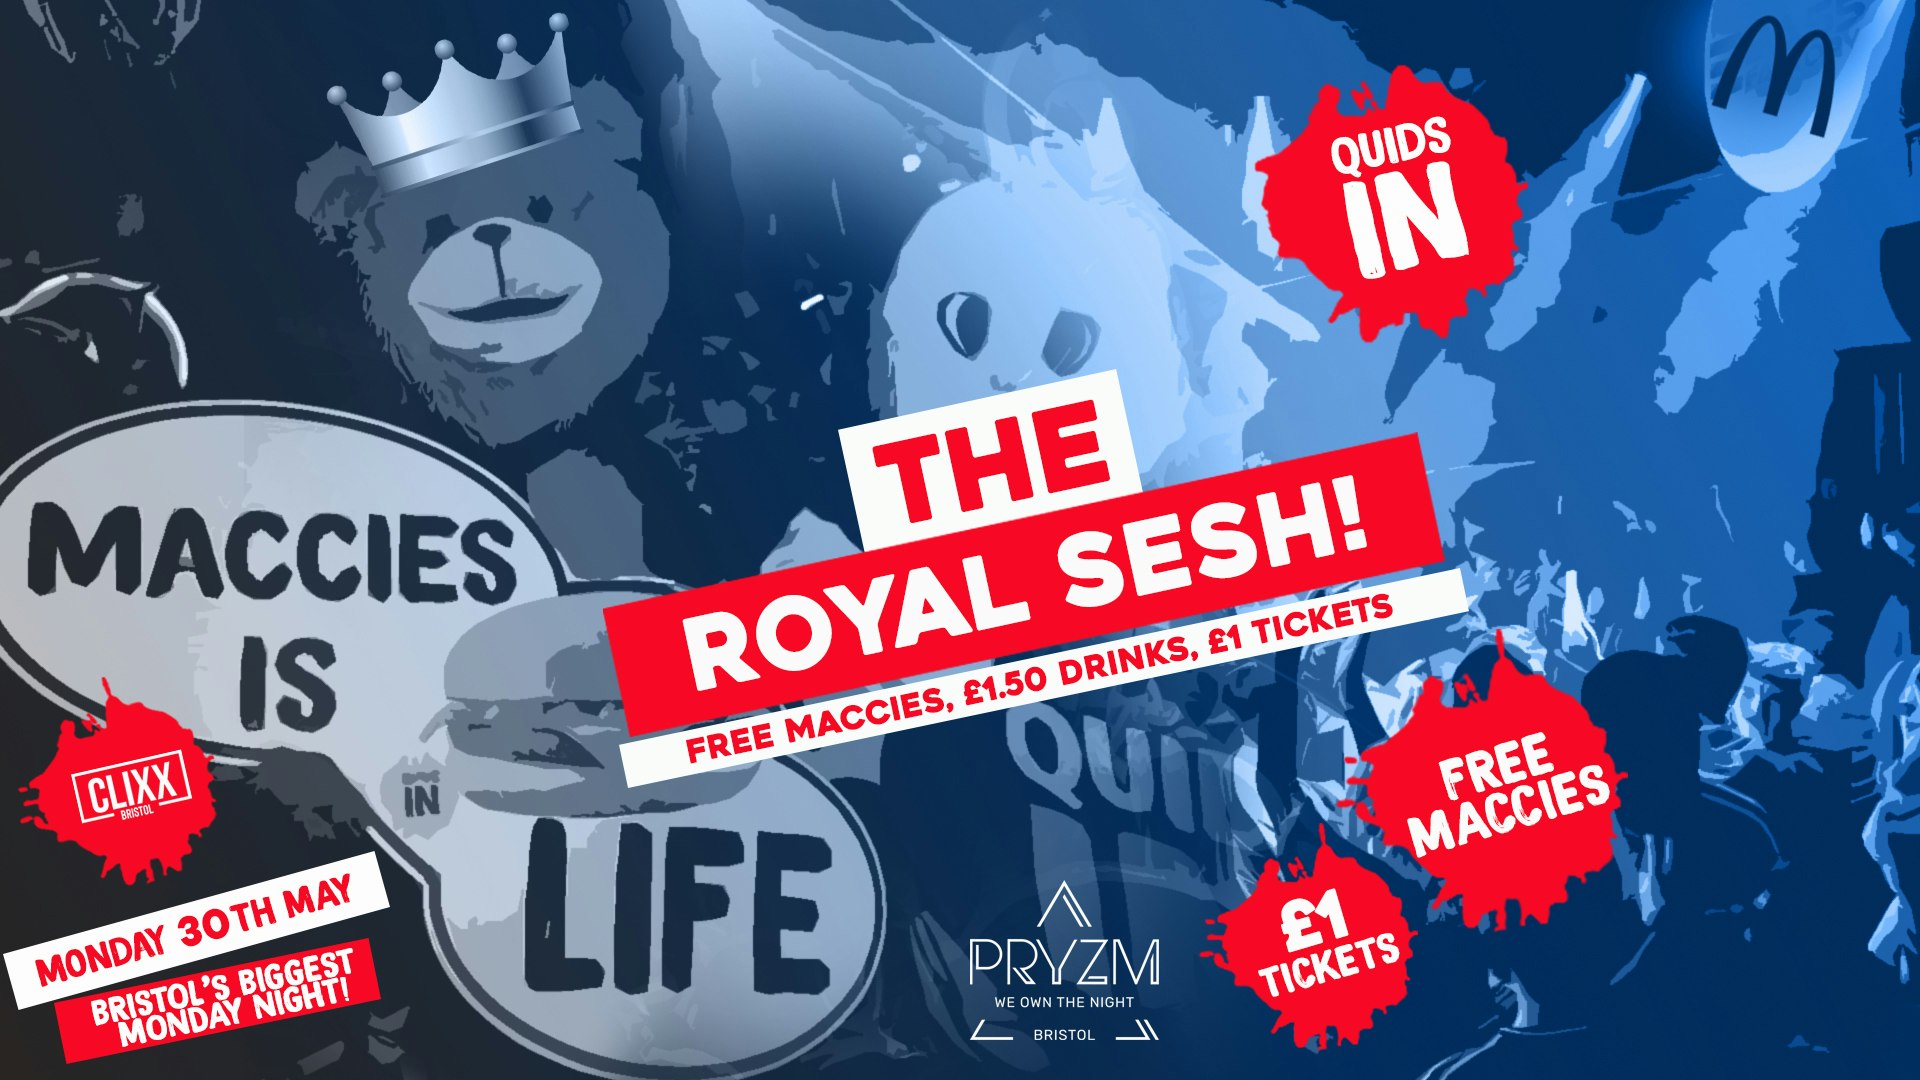 QUIDS IN / The Royal Sesh! –  £1 Tickets